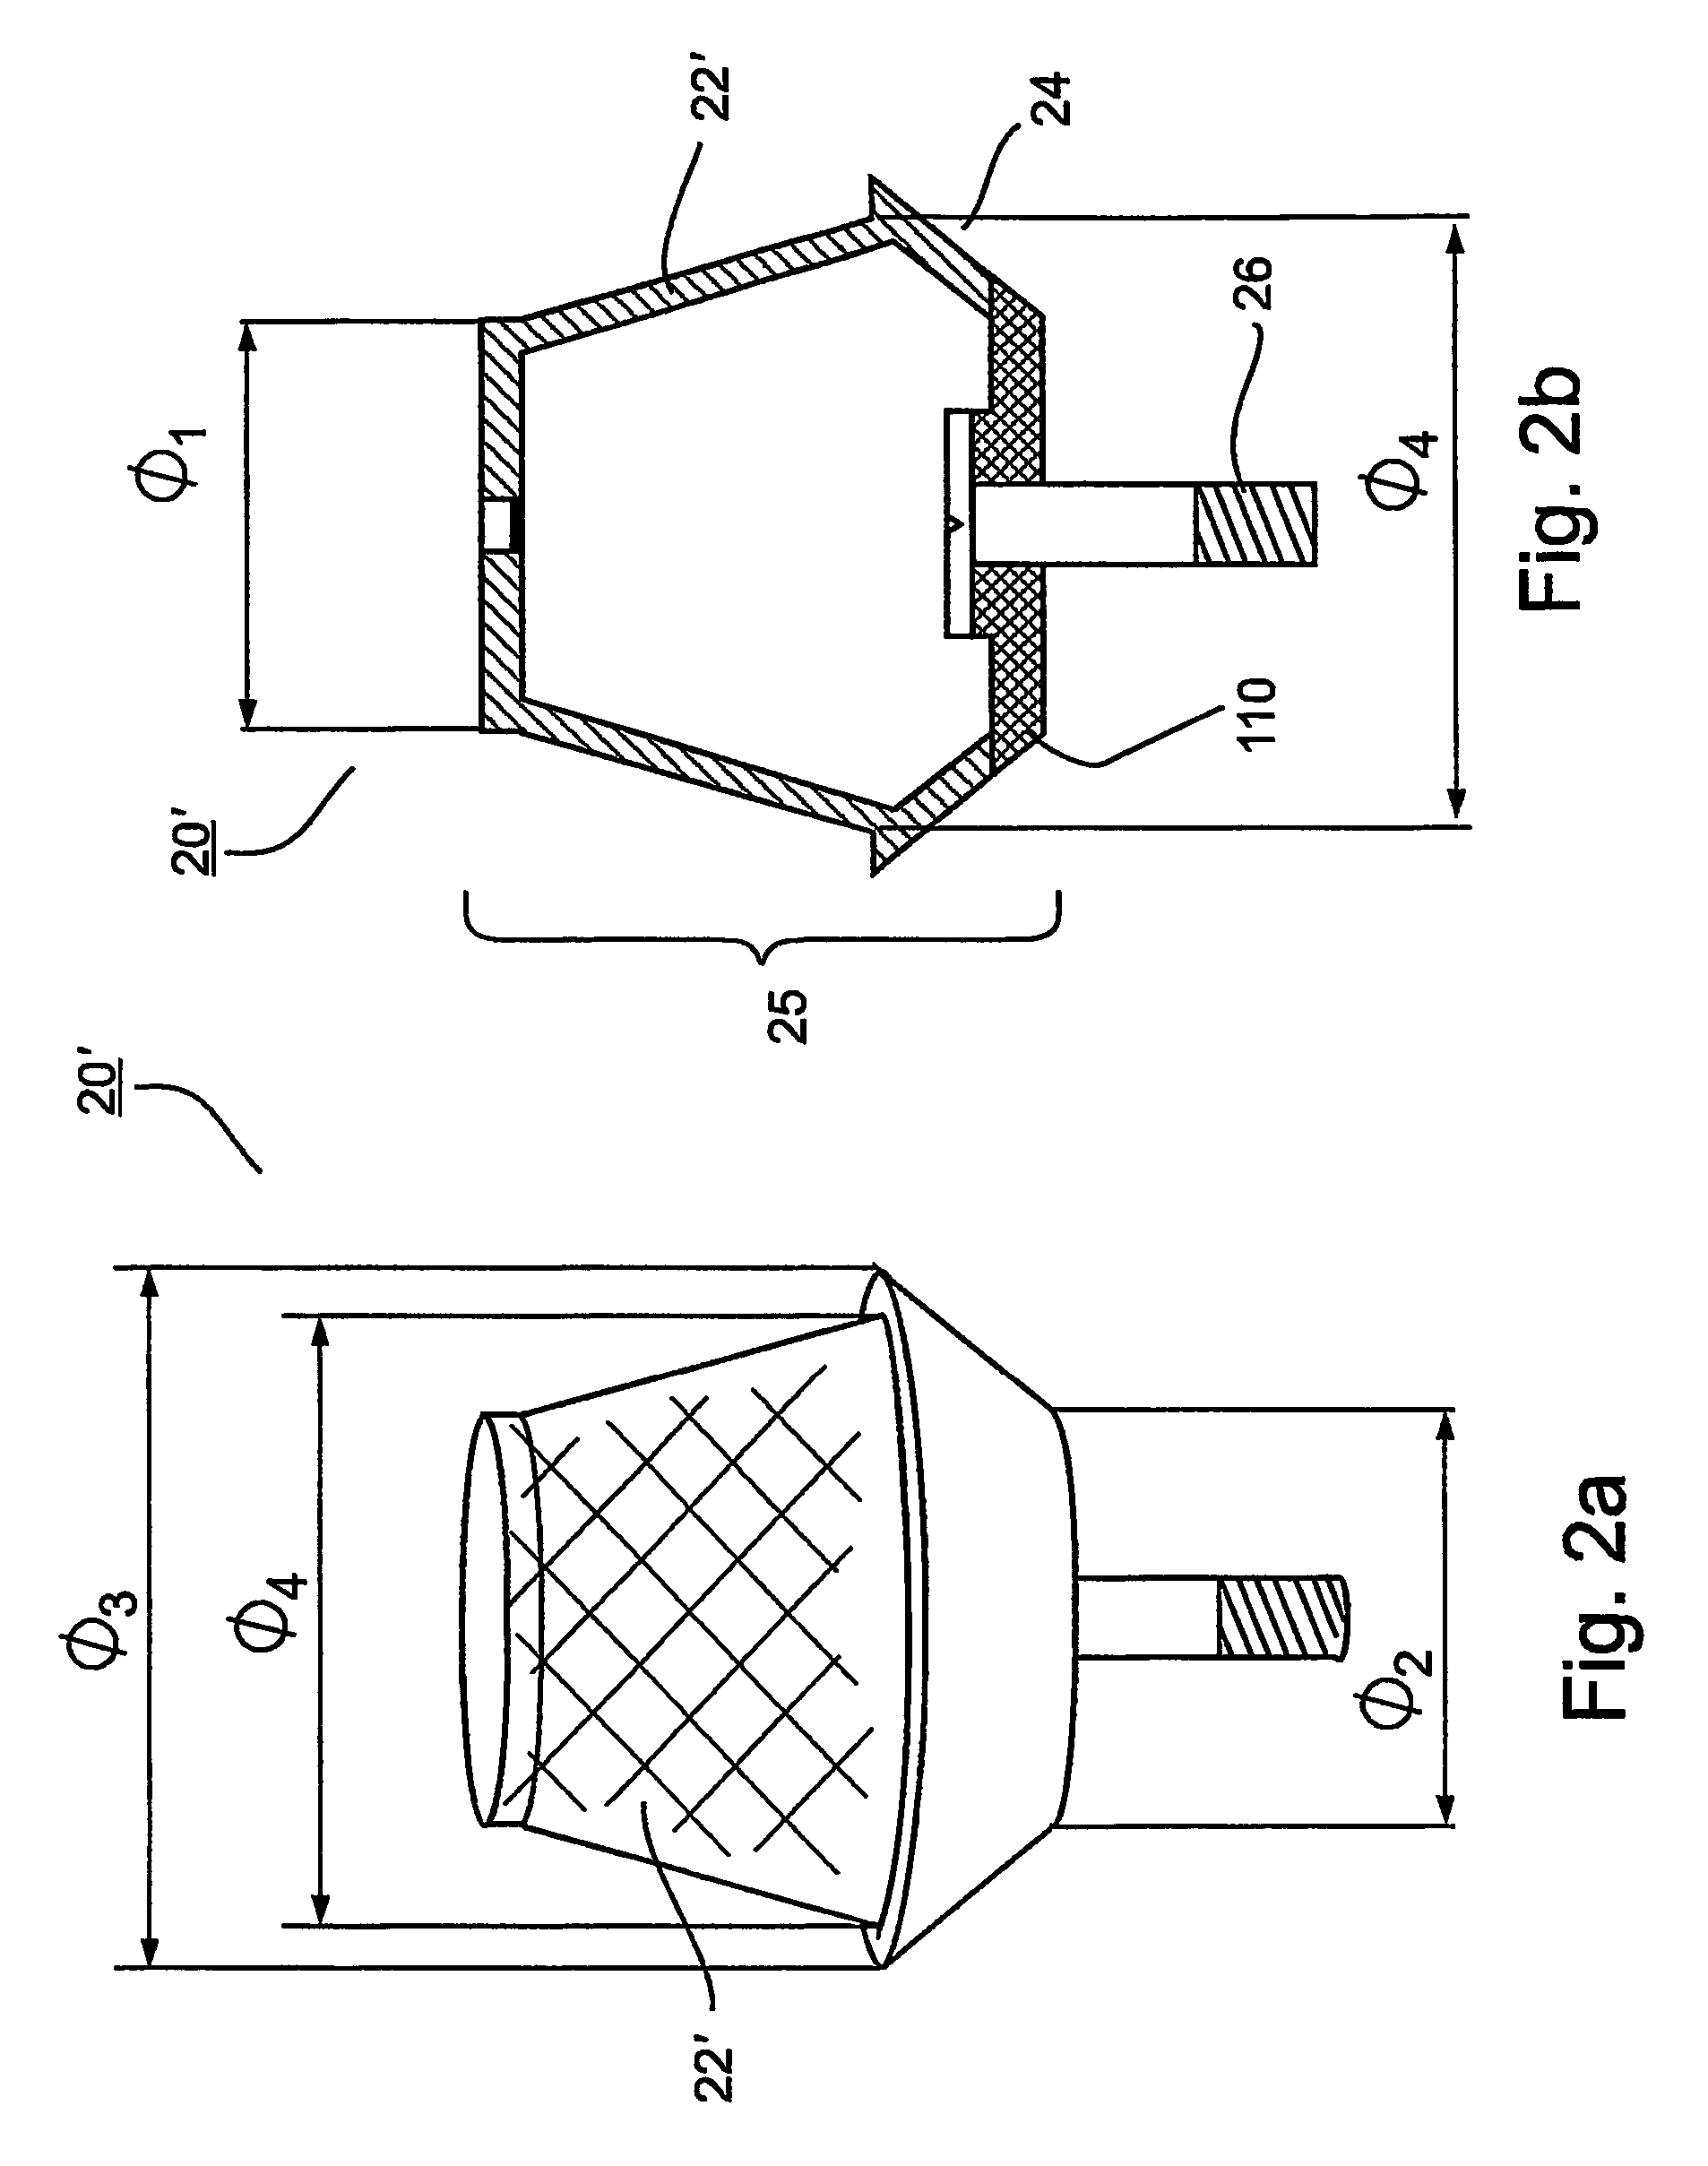 Self powered osteogenesis and osseointegration promotion and maintenance device for endosseous implants